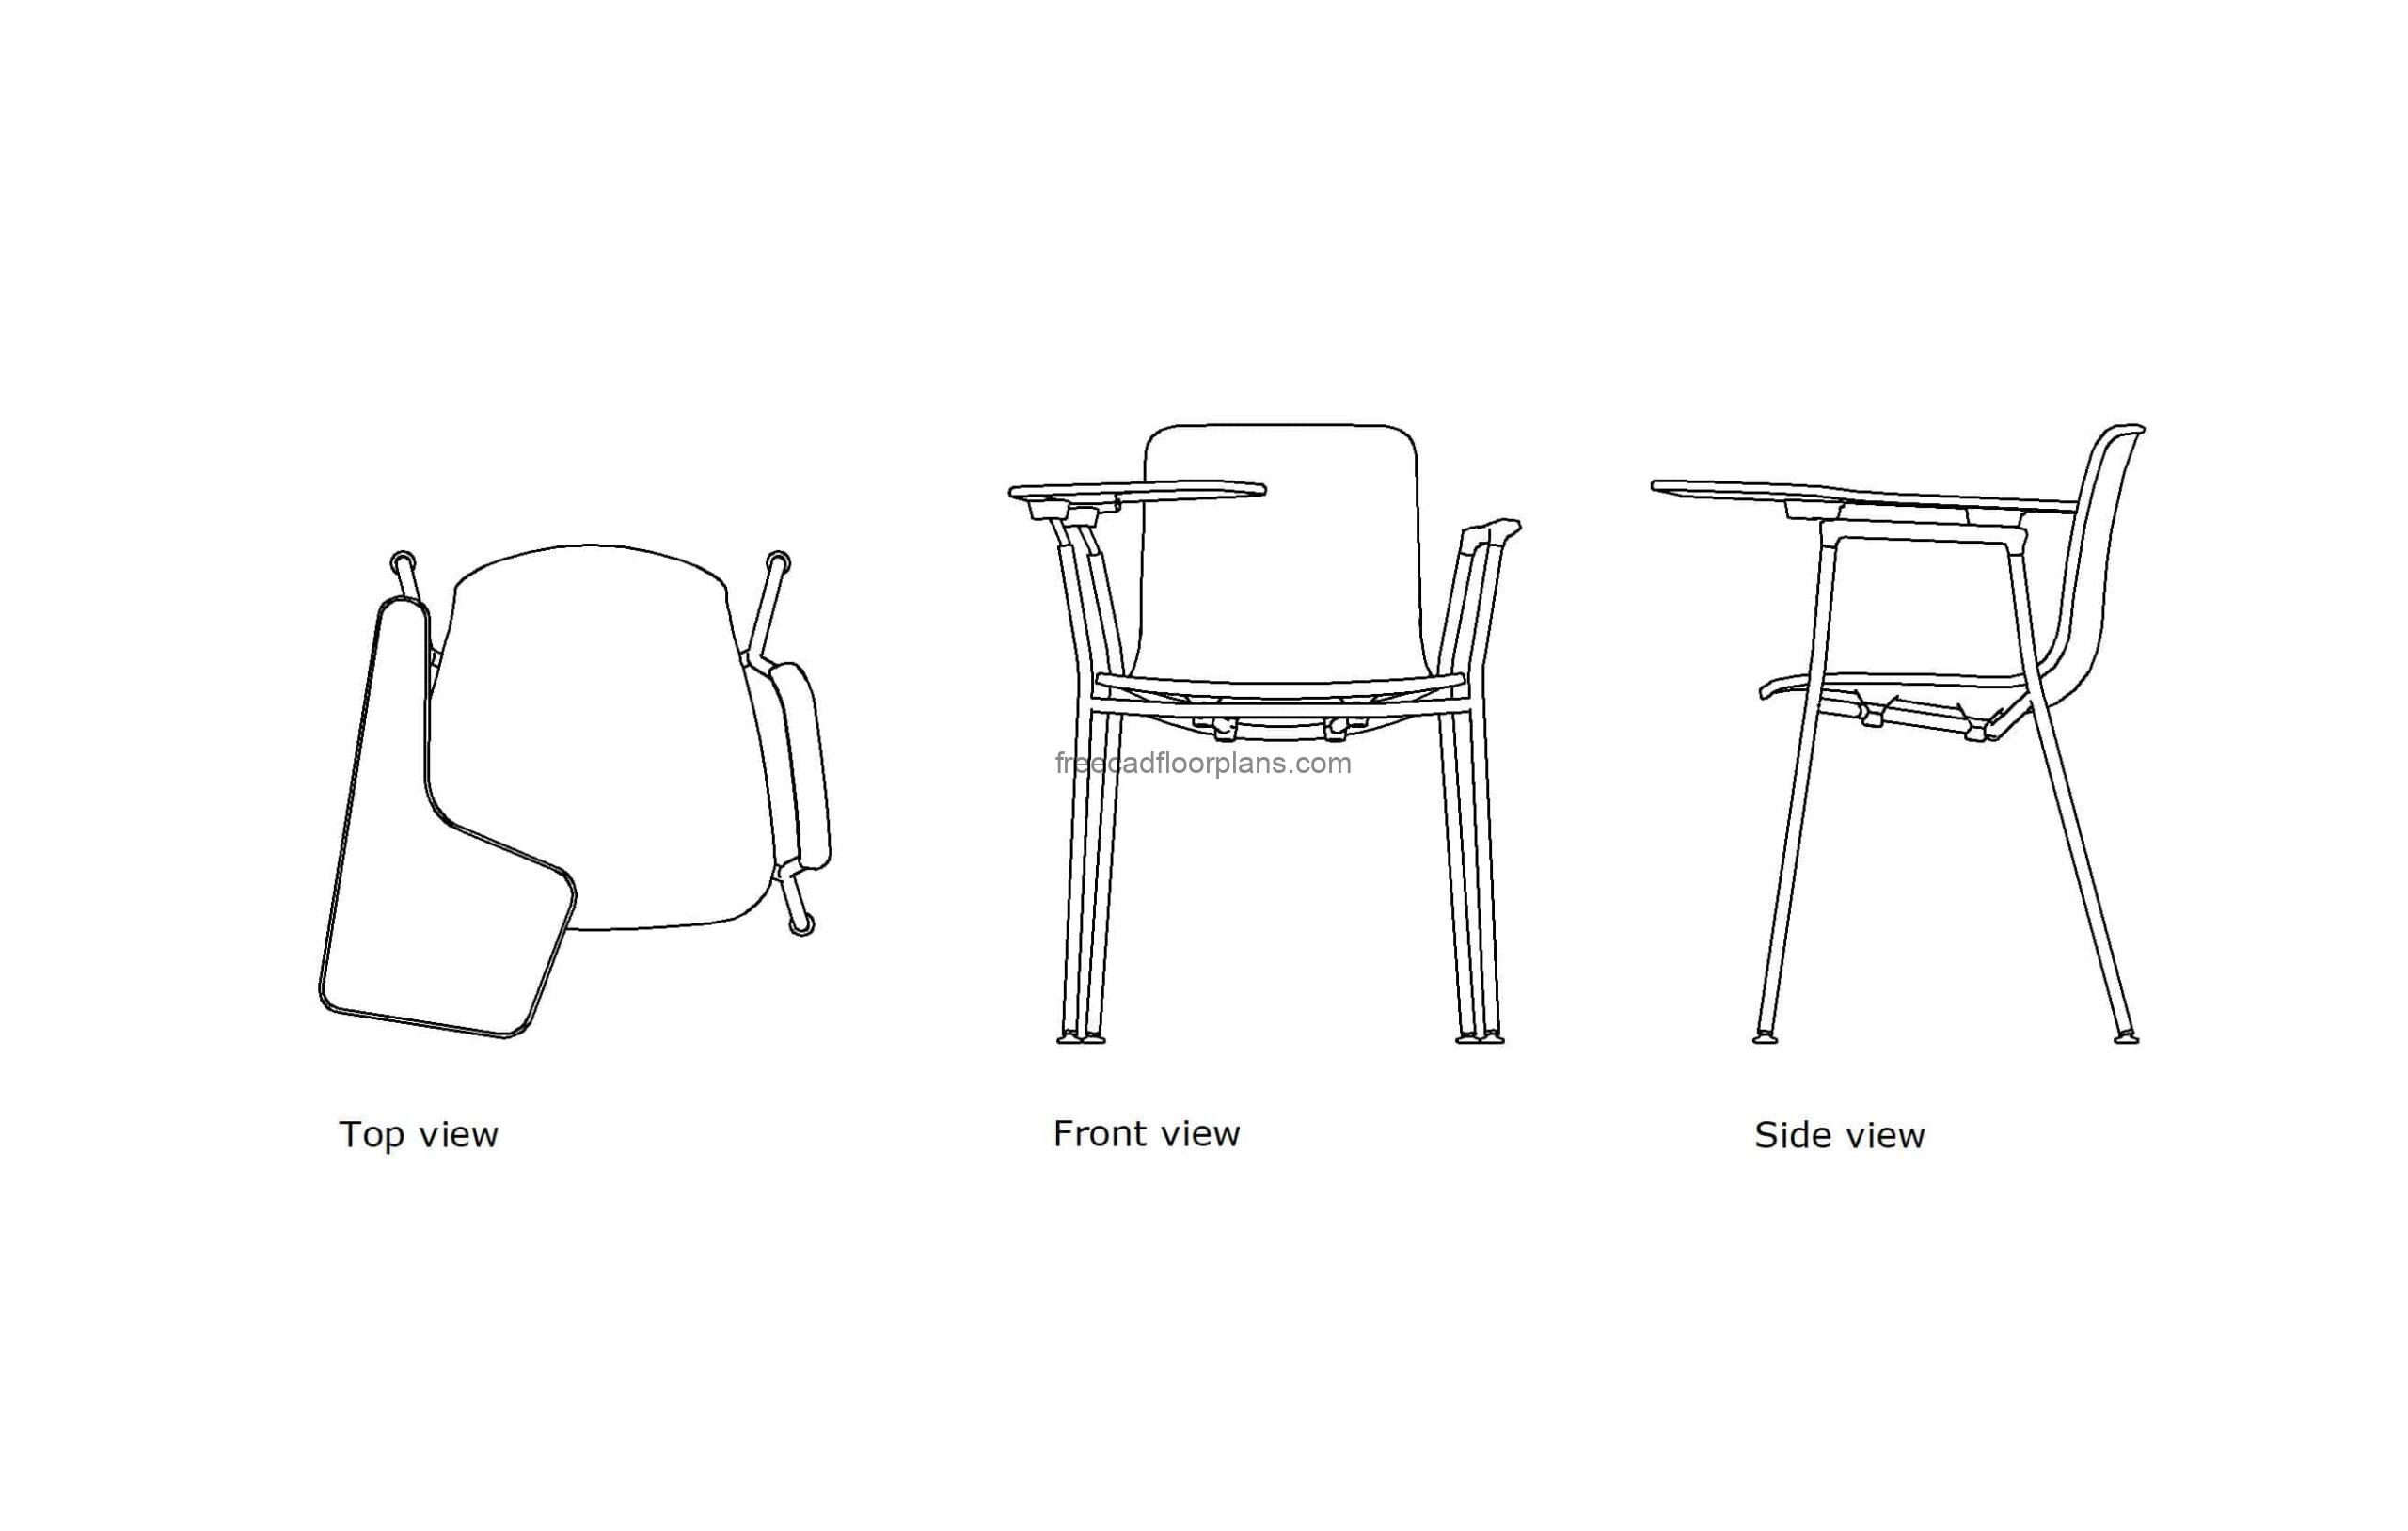 autocad drawing of a university class chair, plan and elevation 2d views, dwg file for free download